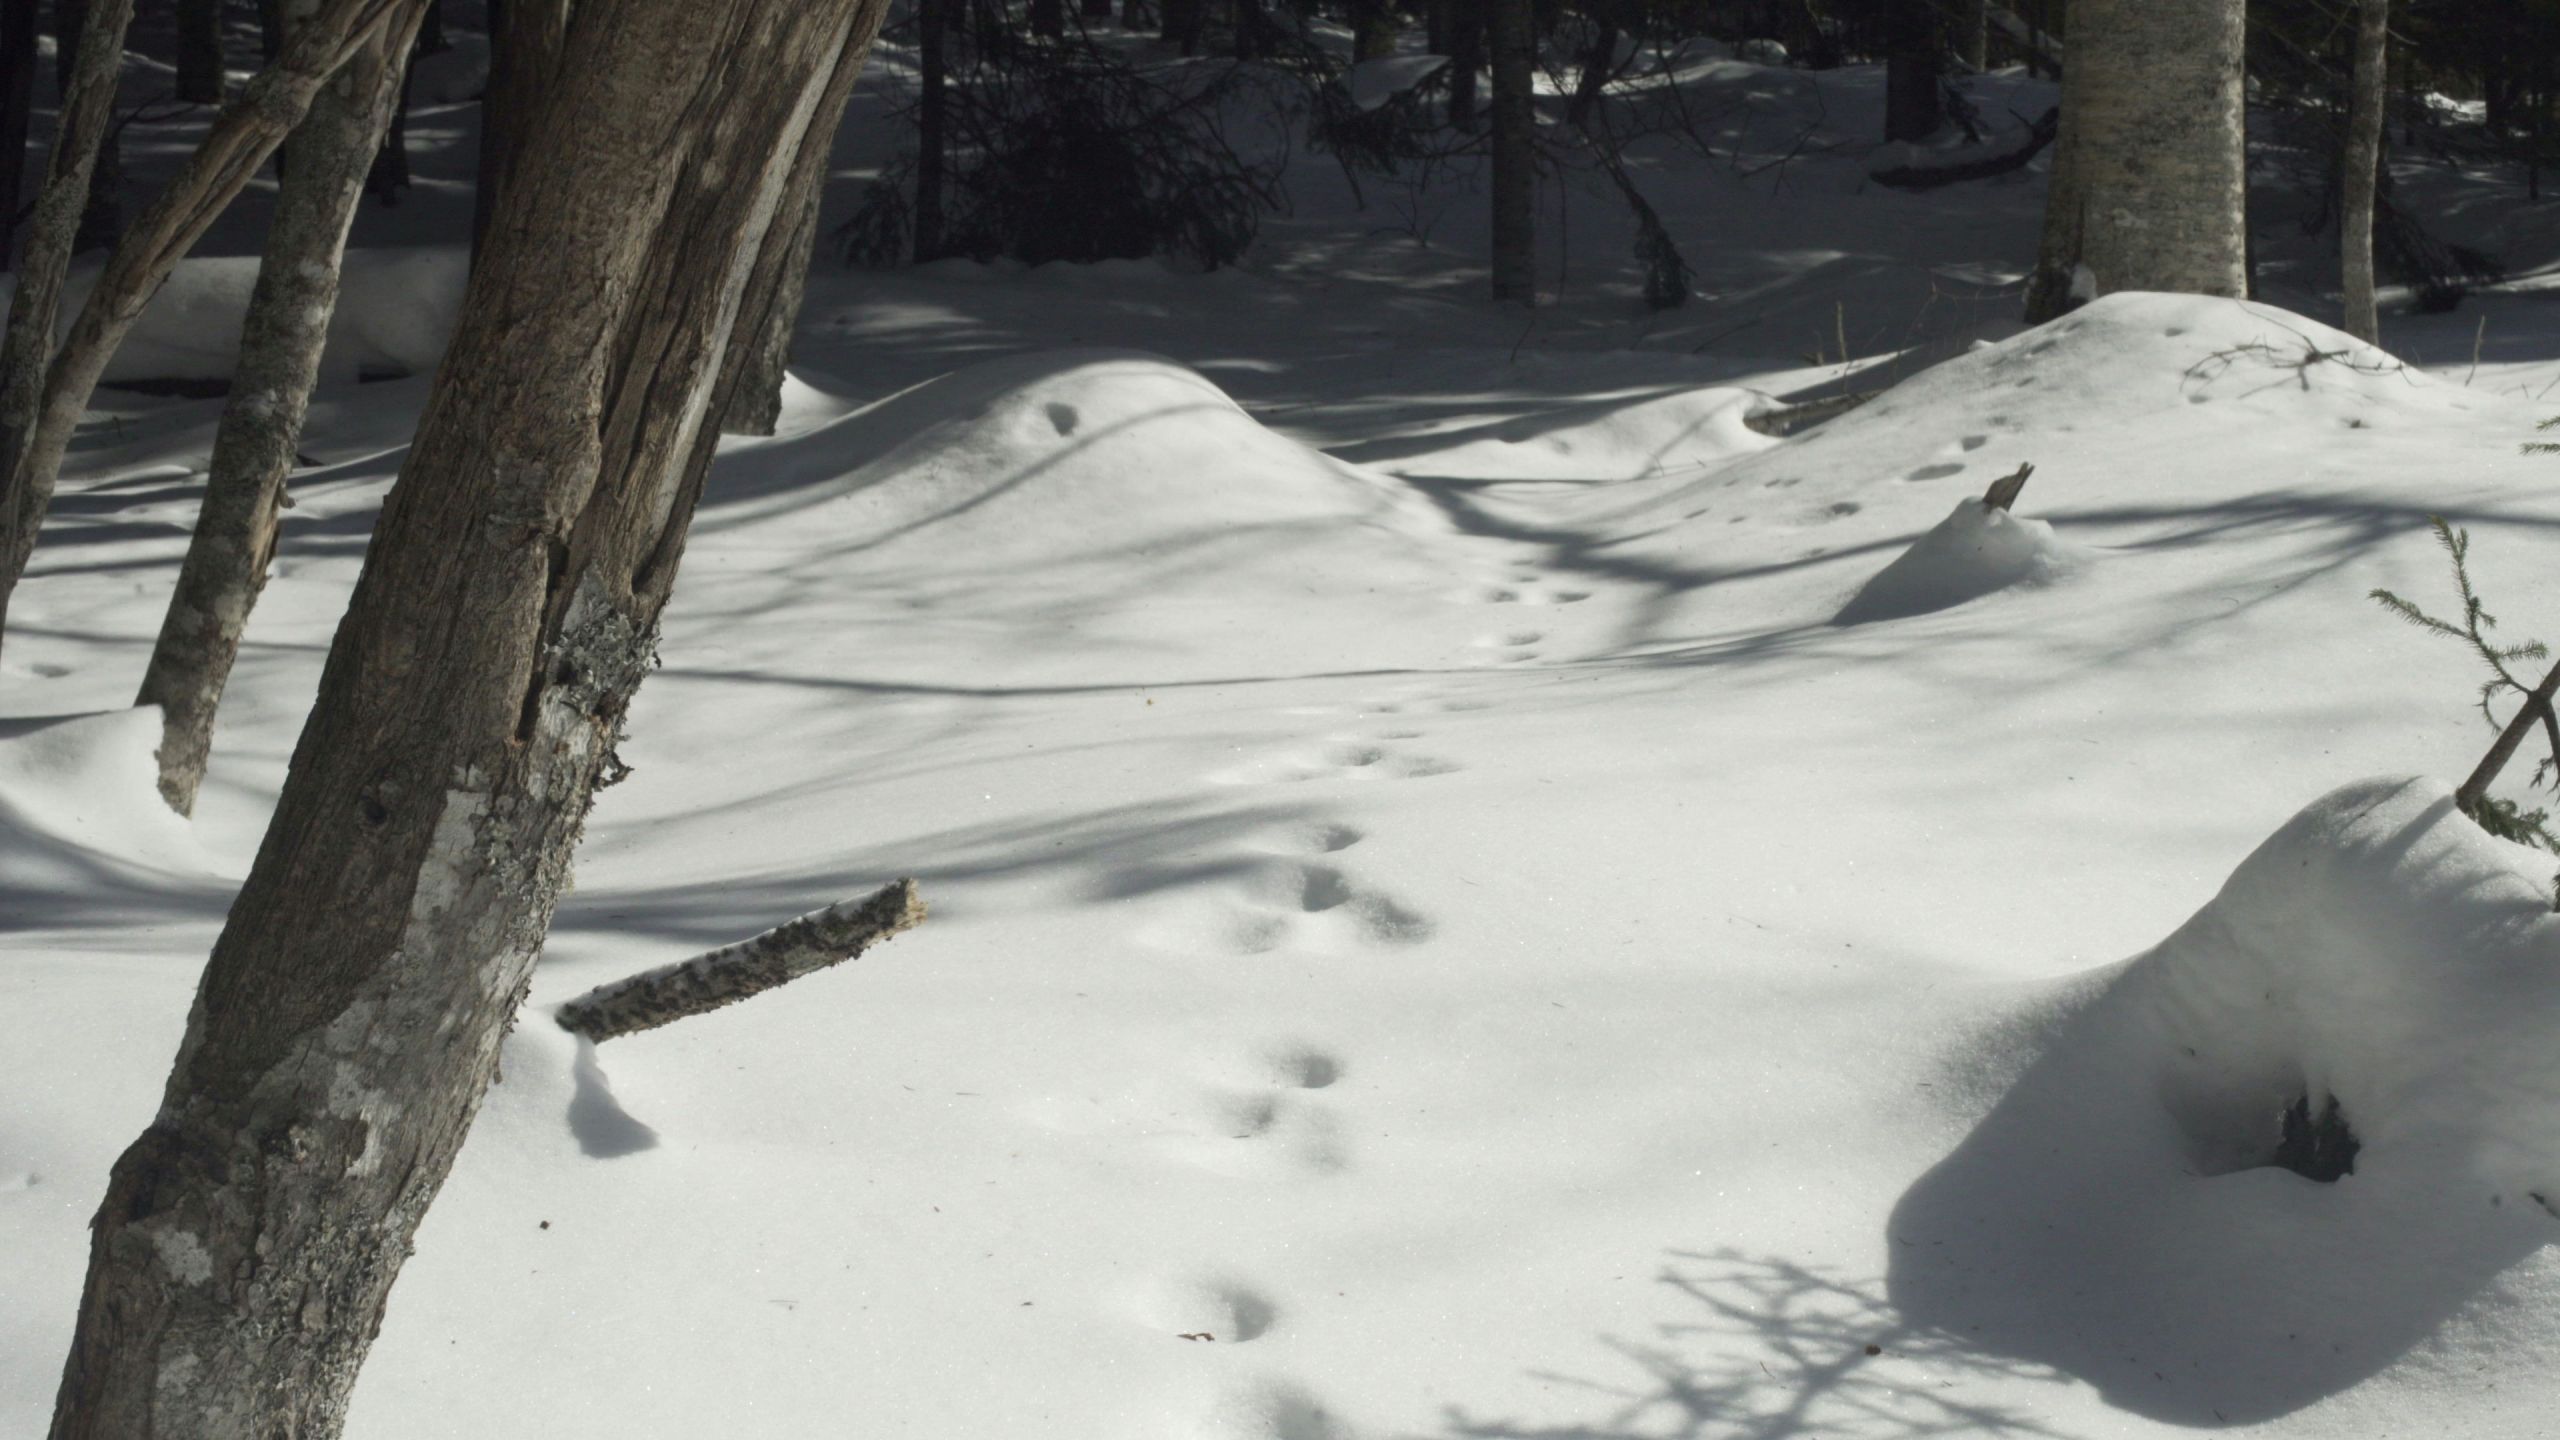 Animal Tracks Drawing Animal Tracks In Snow forest Stock Footage Snow Tracks